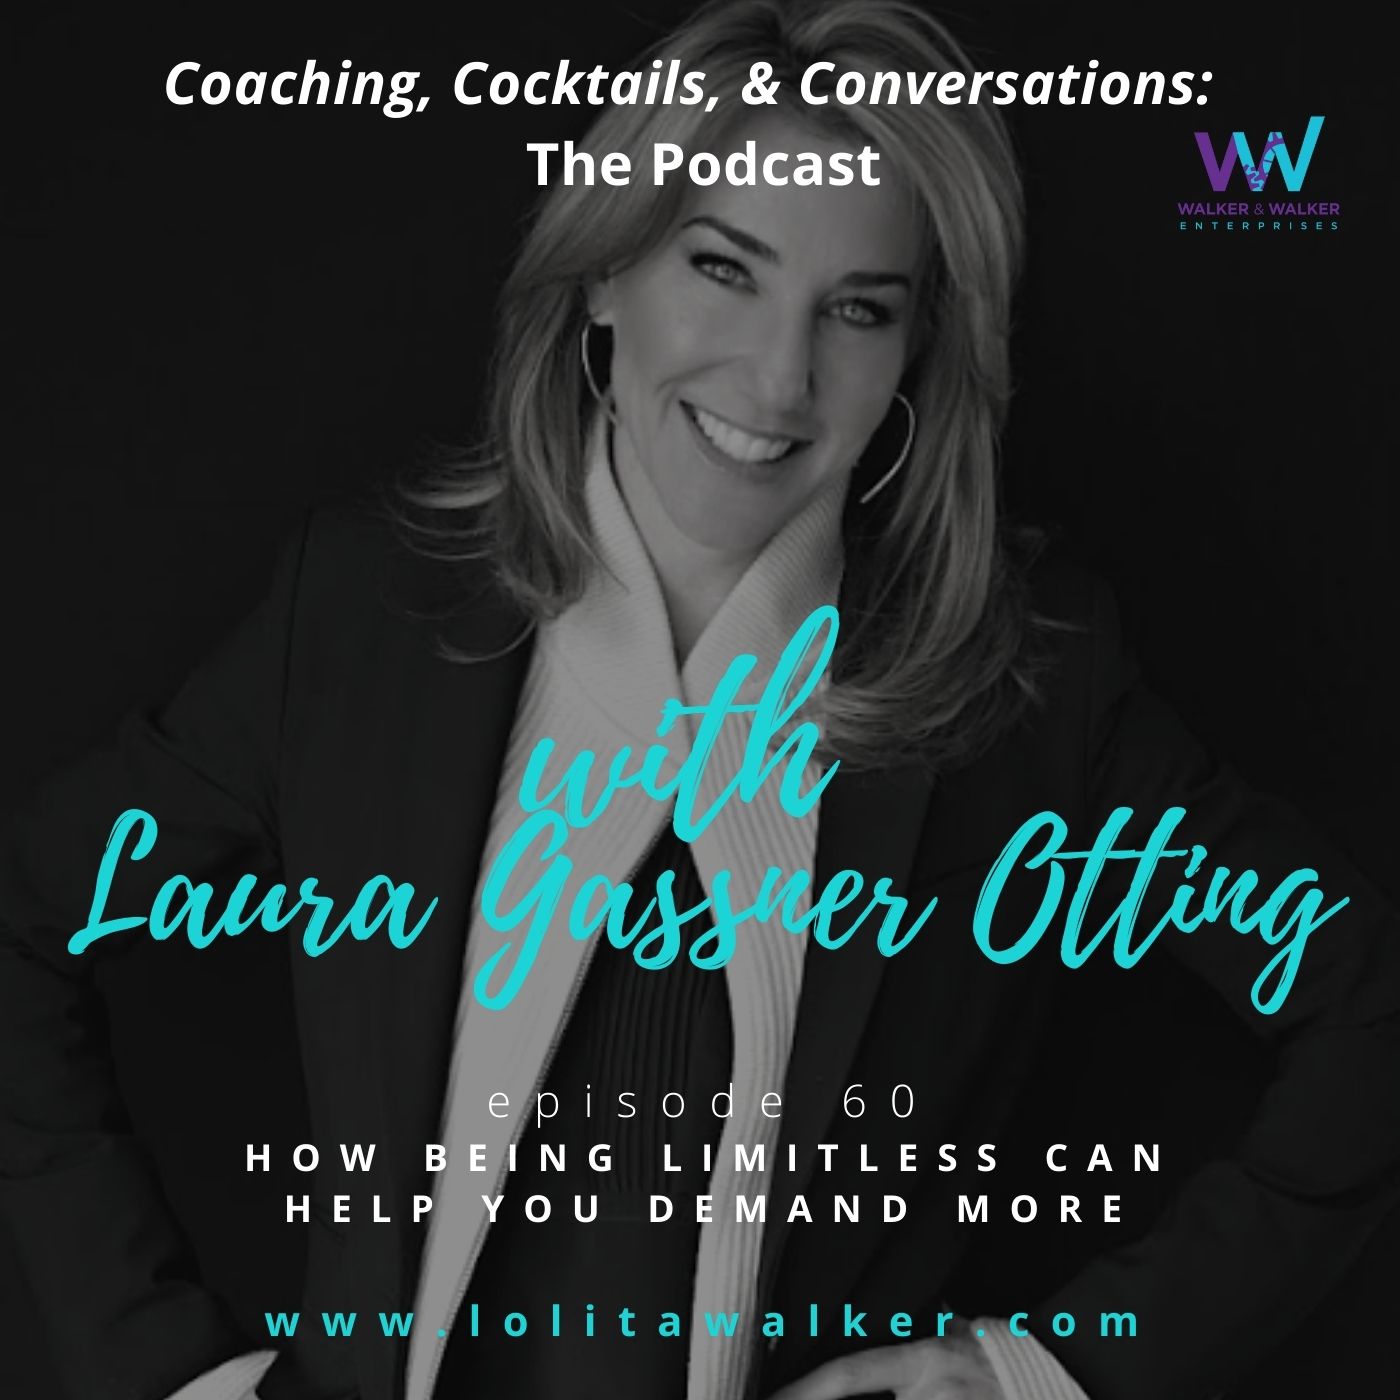 S3E60 - How Being Limitless Can Help You Demand More (with Laura Gassner Otting) Image